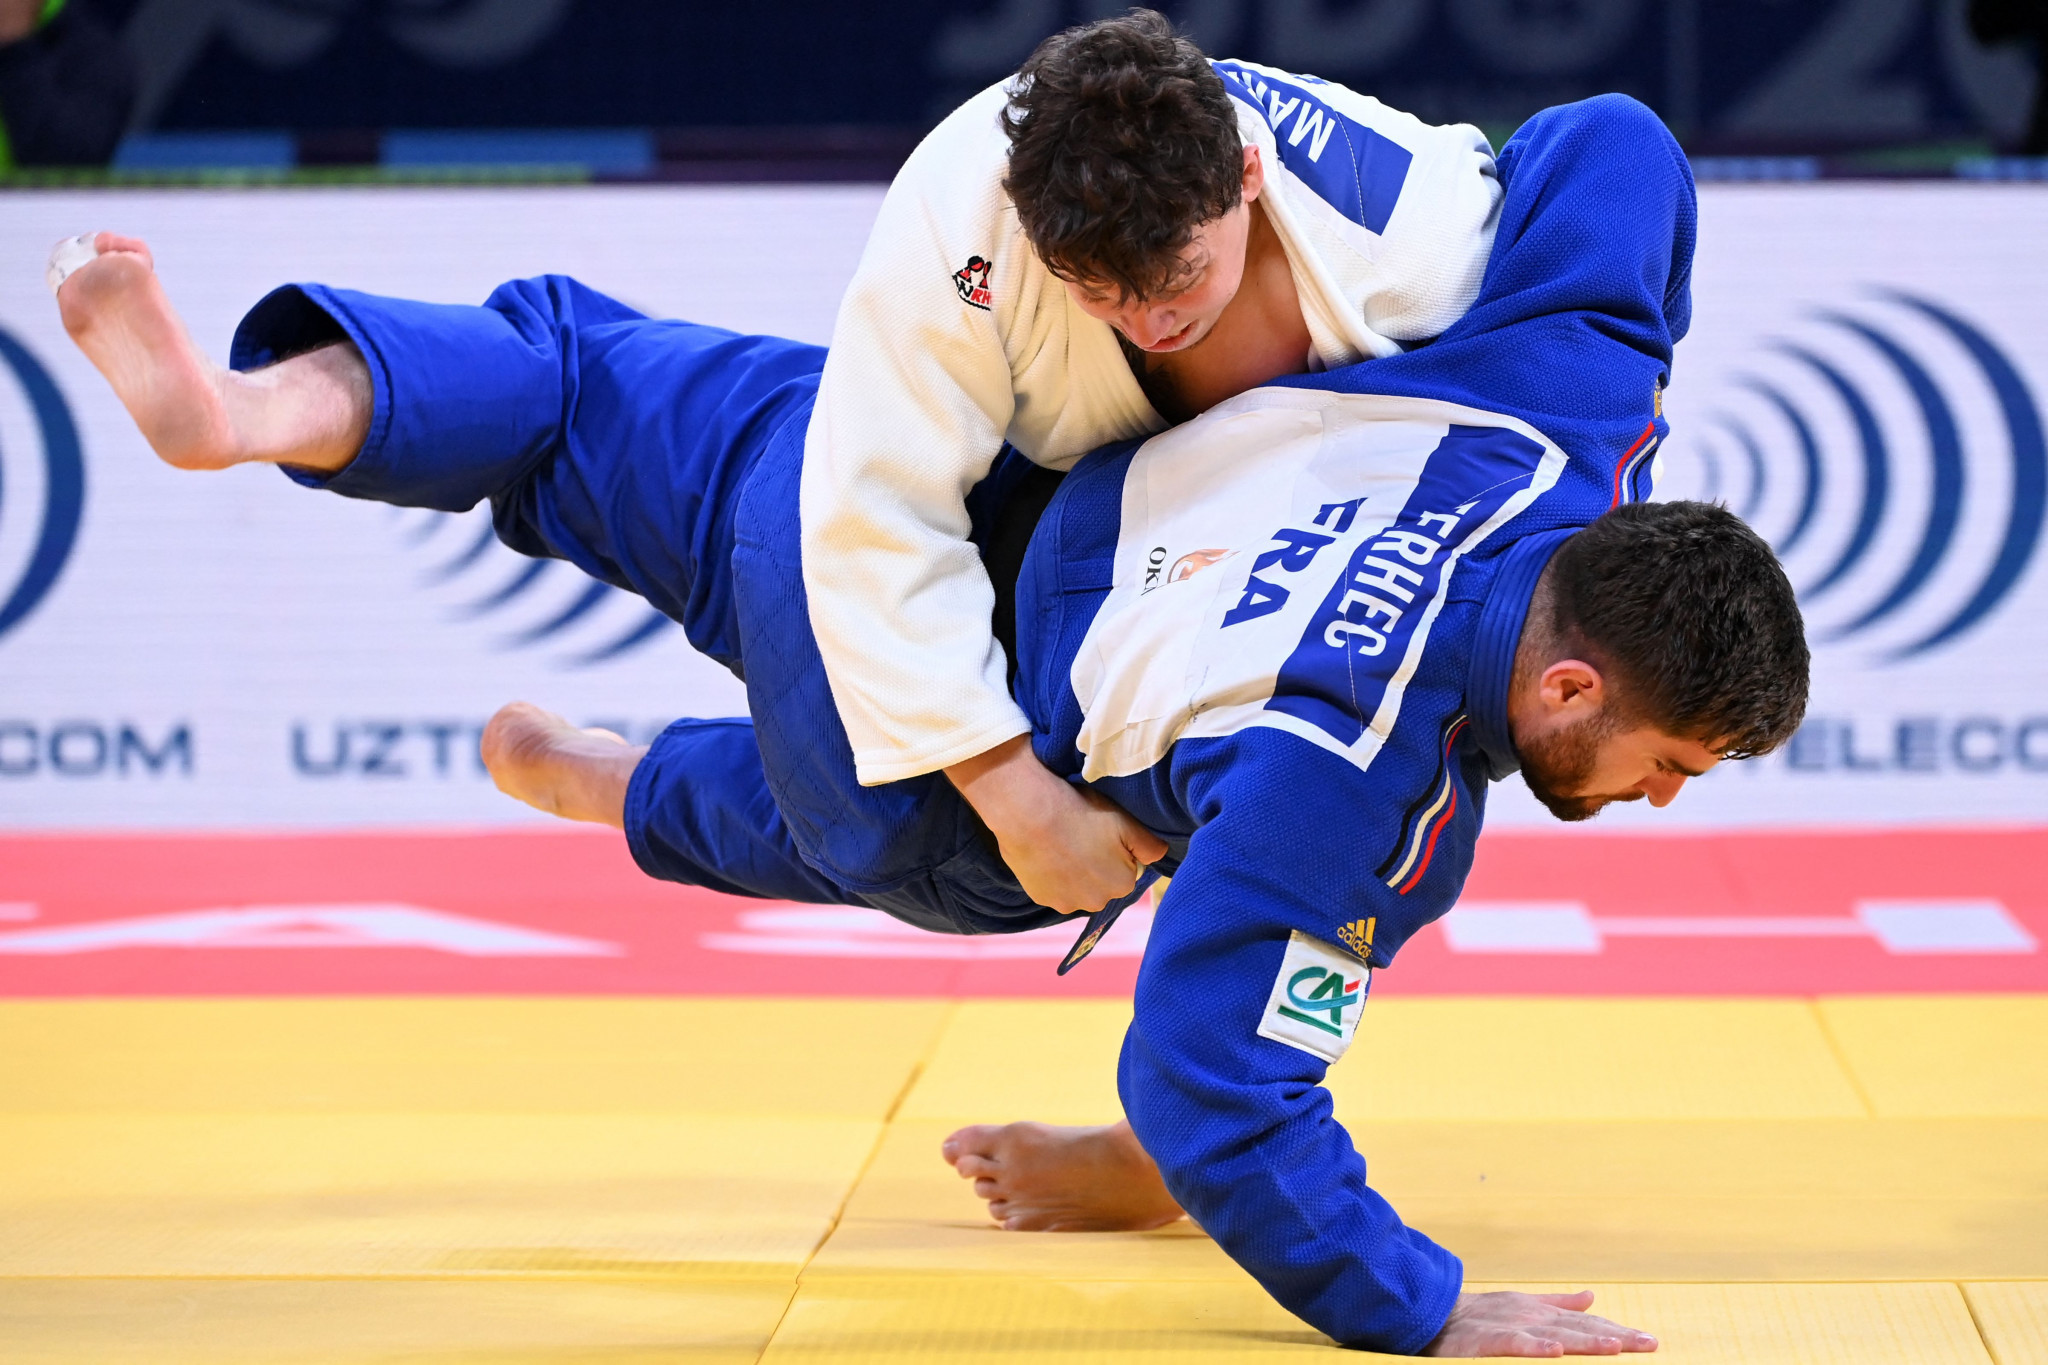 More than 100 judo events are planned to be held across Europe next year ©IJF